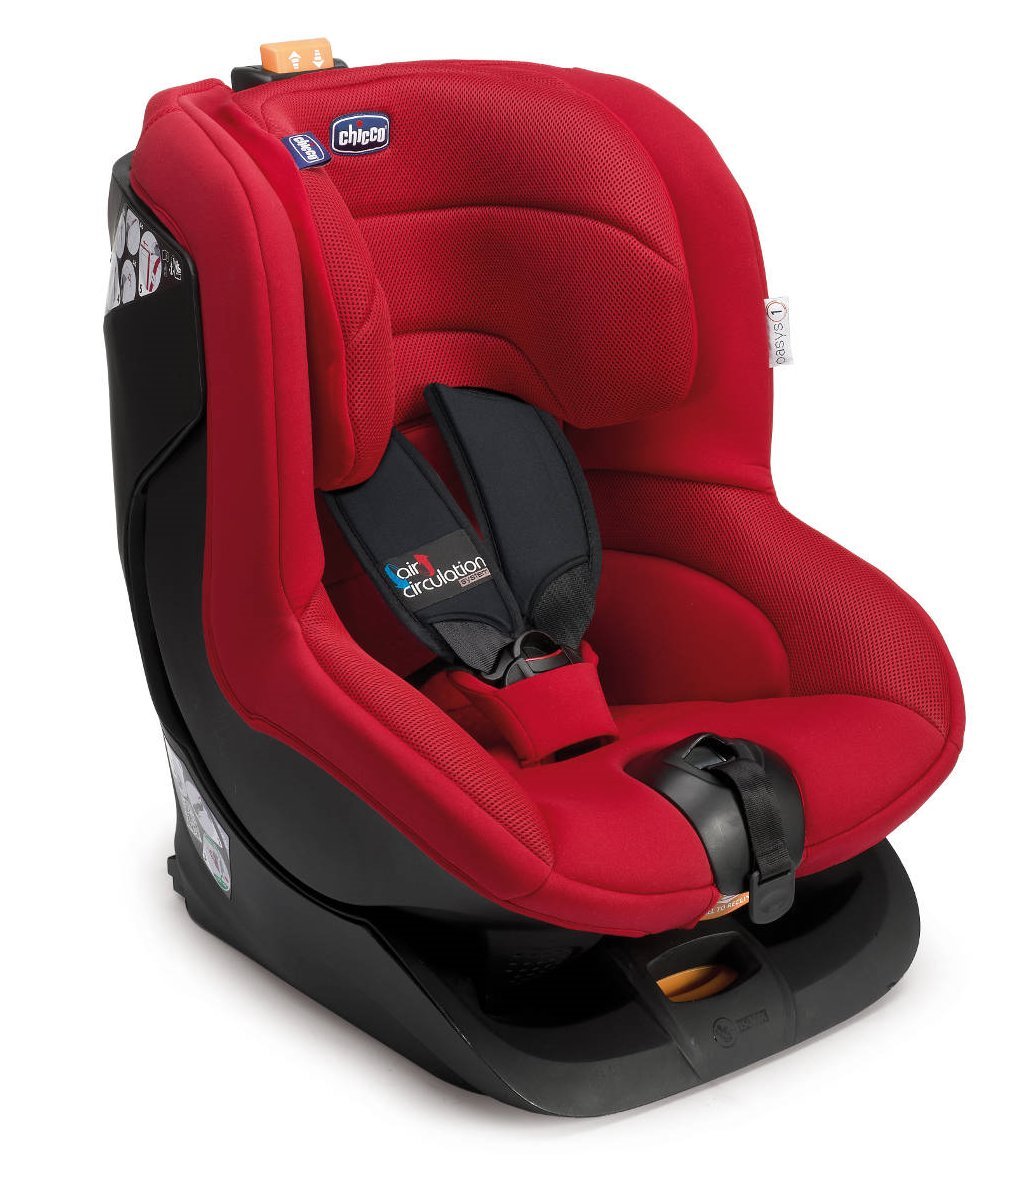 Chicco Oasys 1 Isofix Car Seat (Fire)